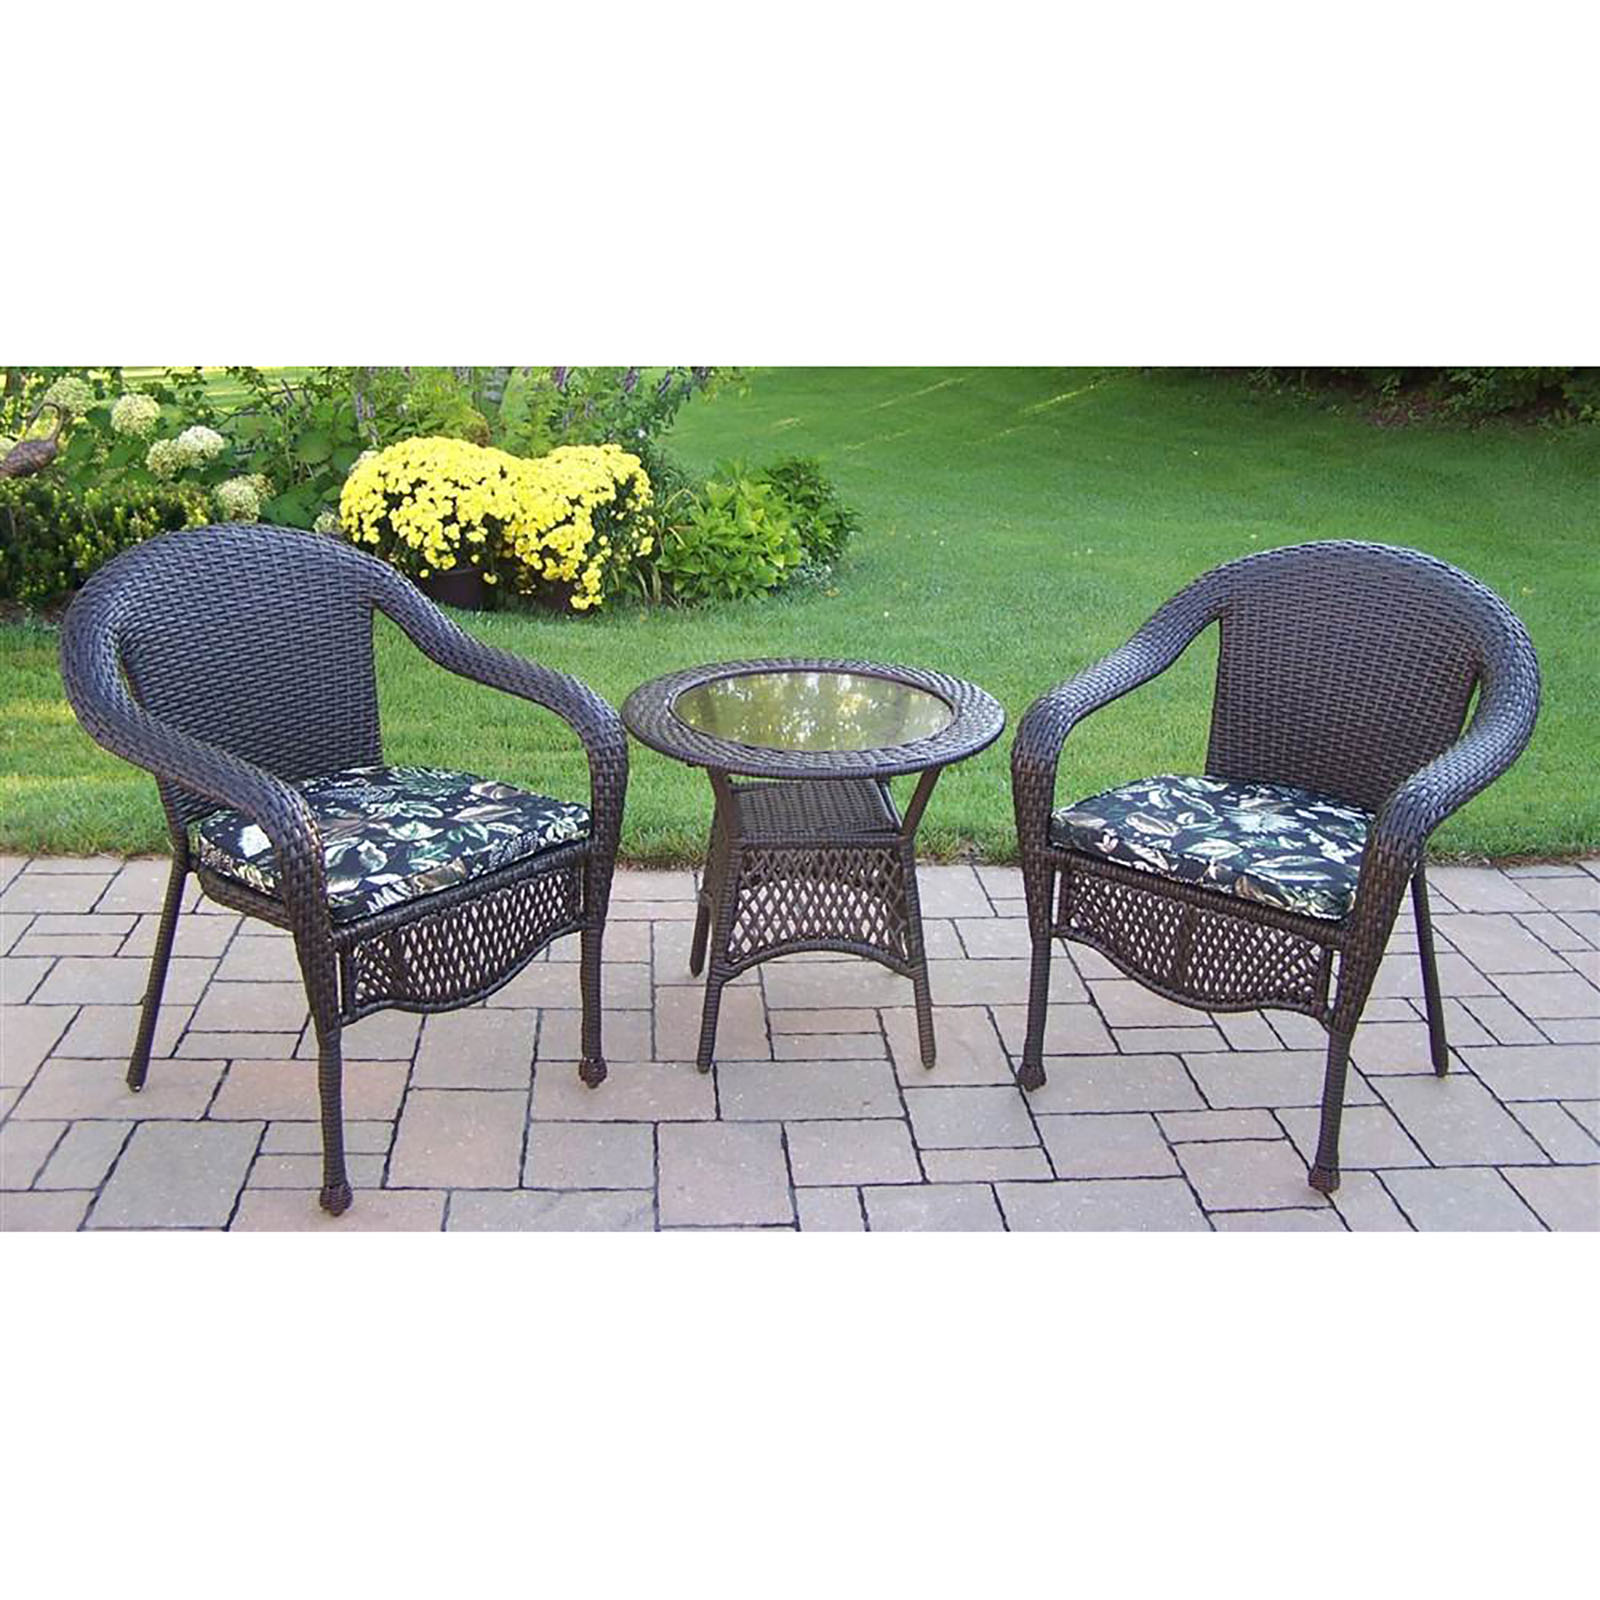 Oakland Living Elite 3pc. Resin Wicker Outdoor Seating Set - Coffee